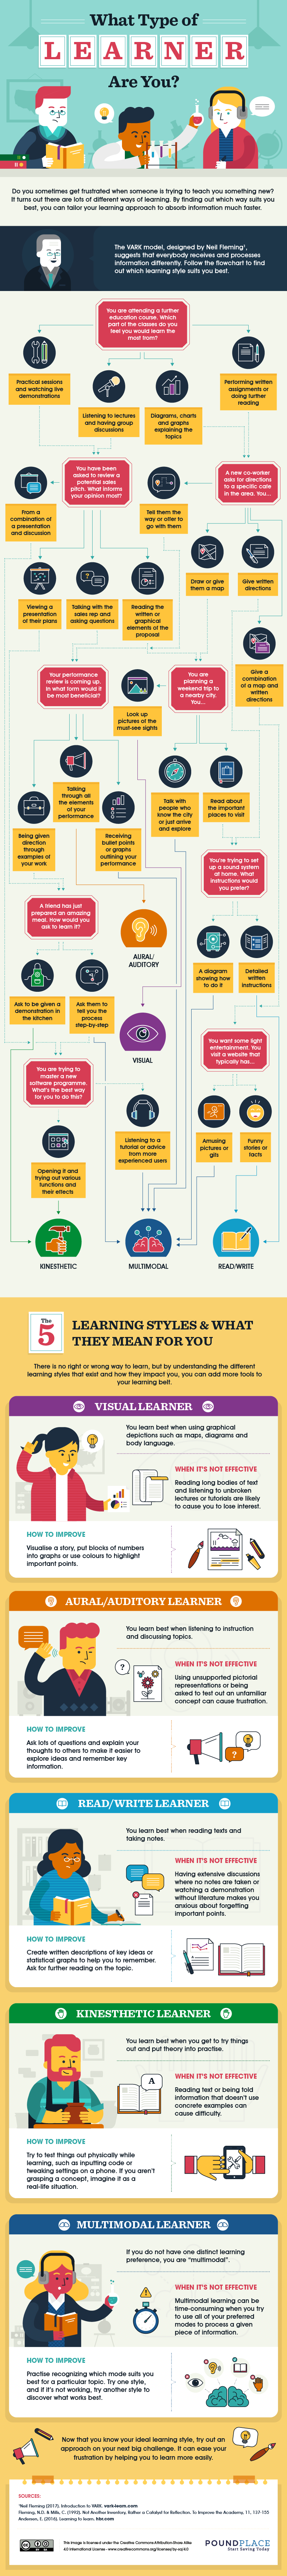 DESIGN_What Type of Learner Are You